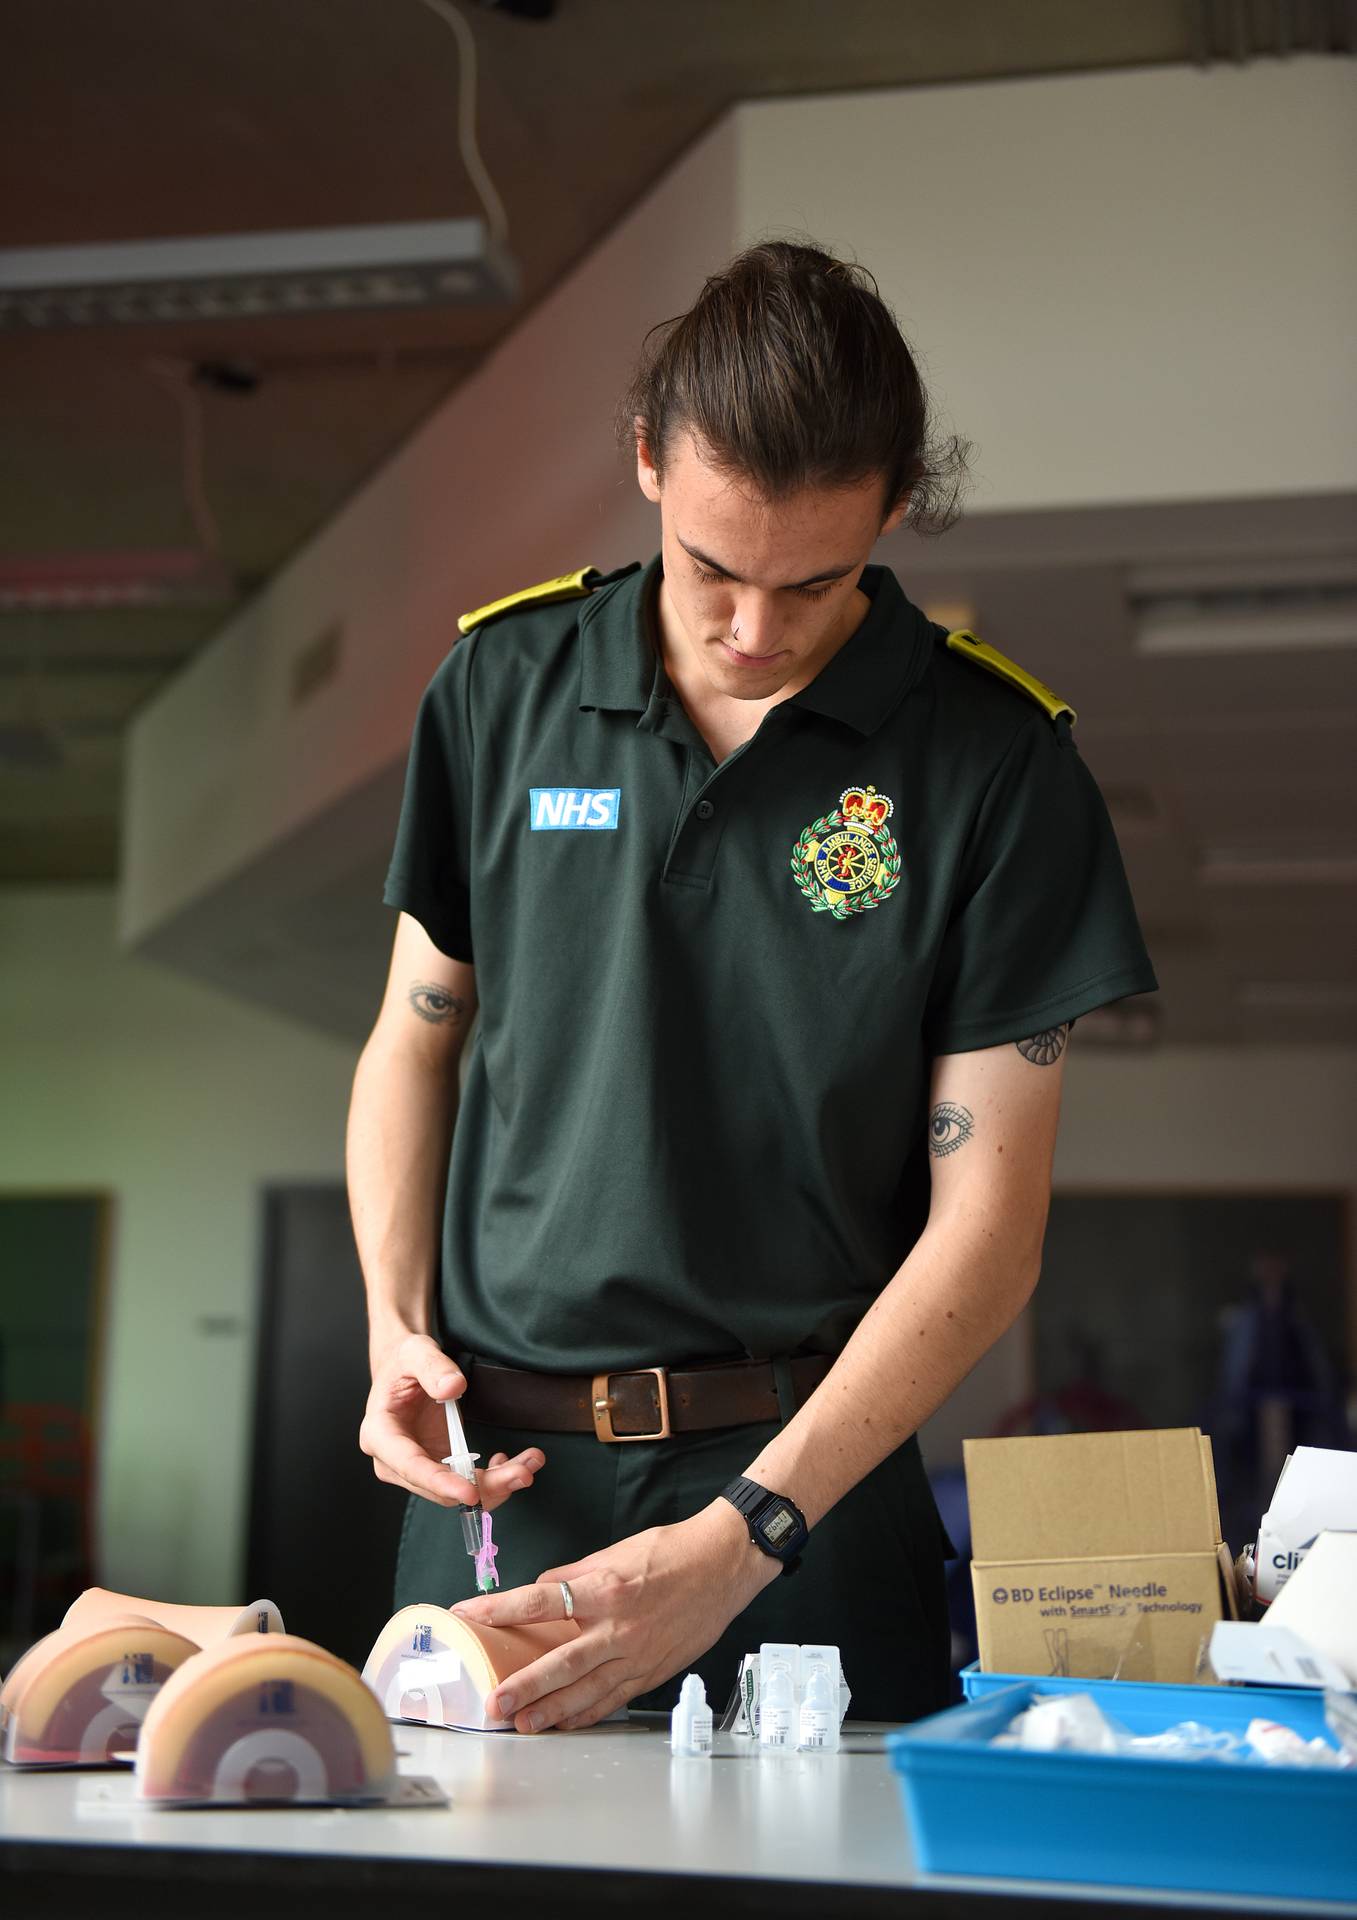 A student paramedic with syringe